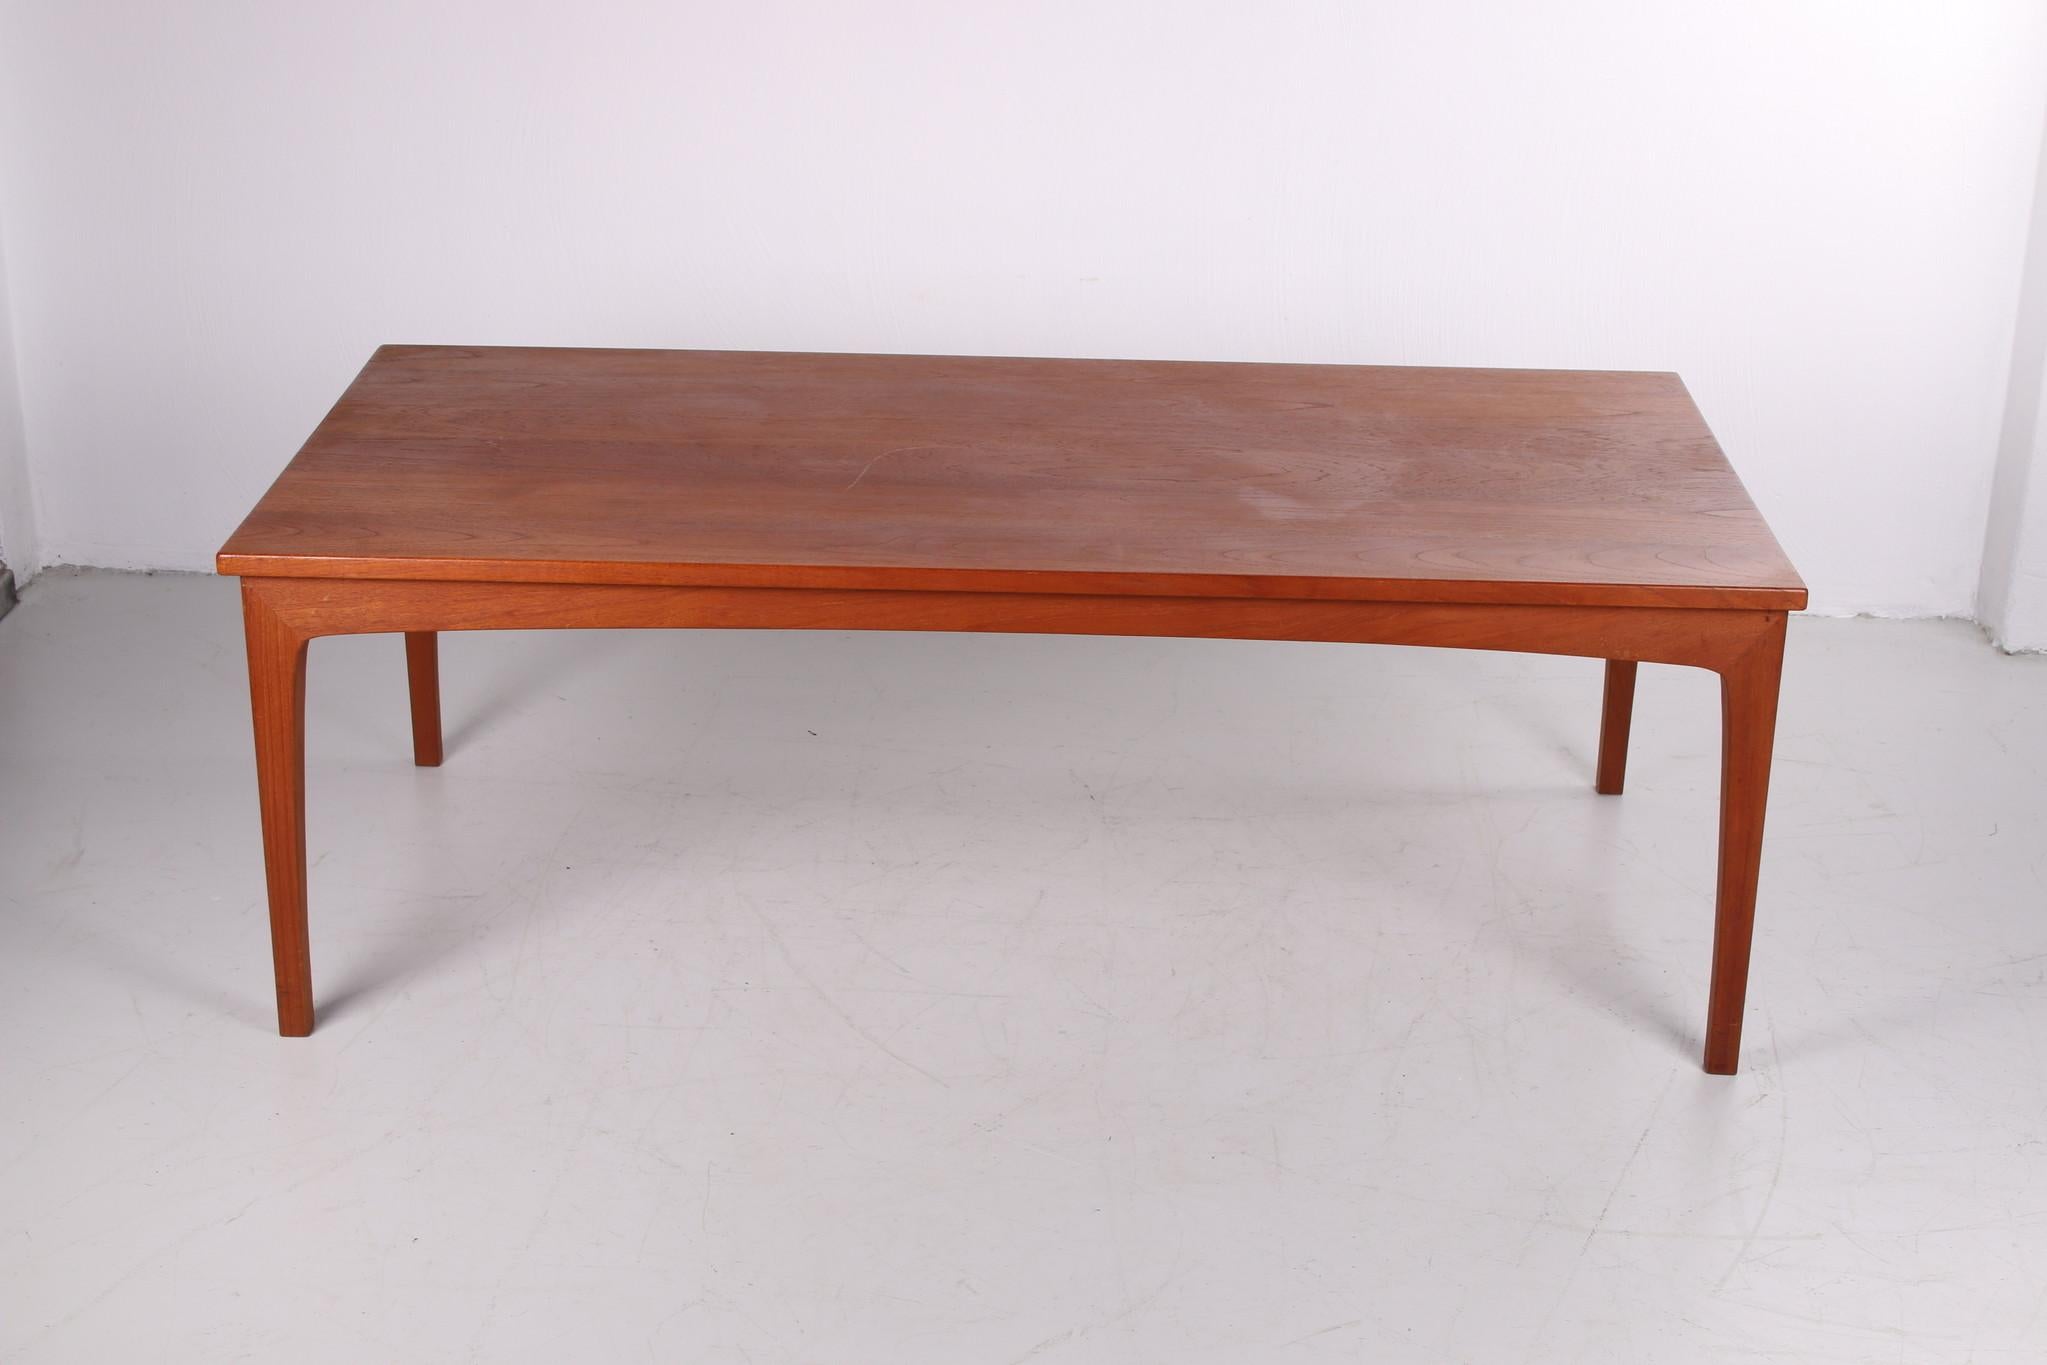 Danish Design Coffee Table from solid Teak design by Niels Bach 1960 For Sale 3